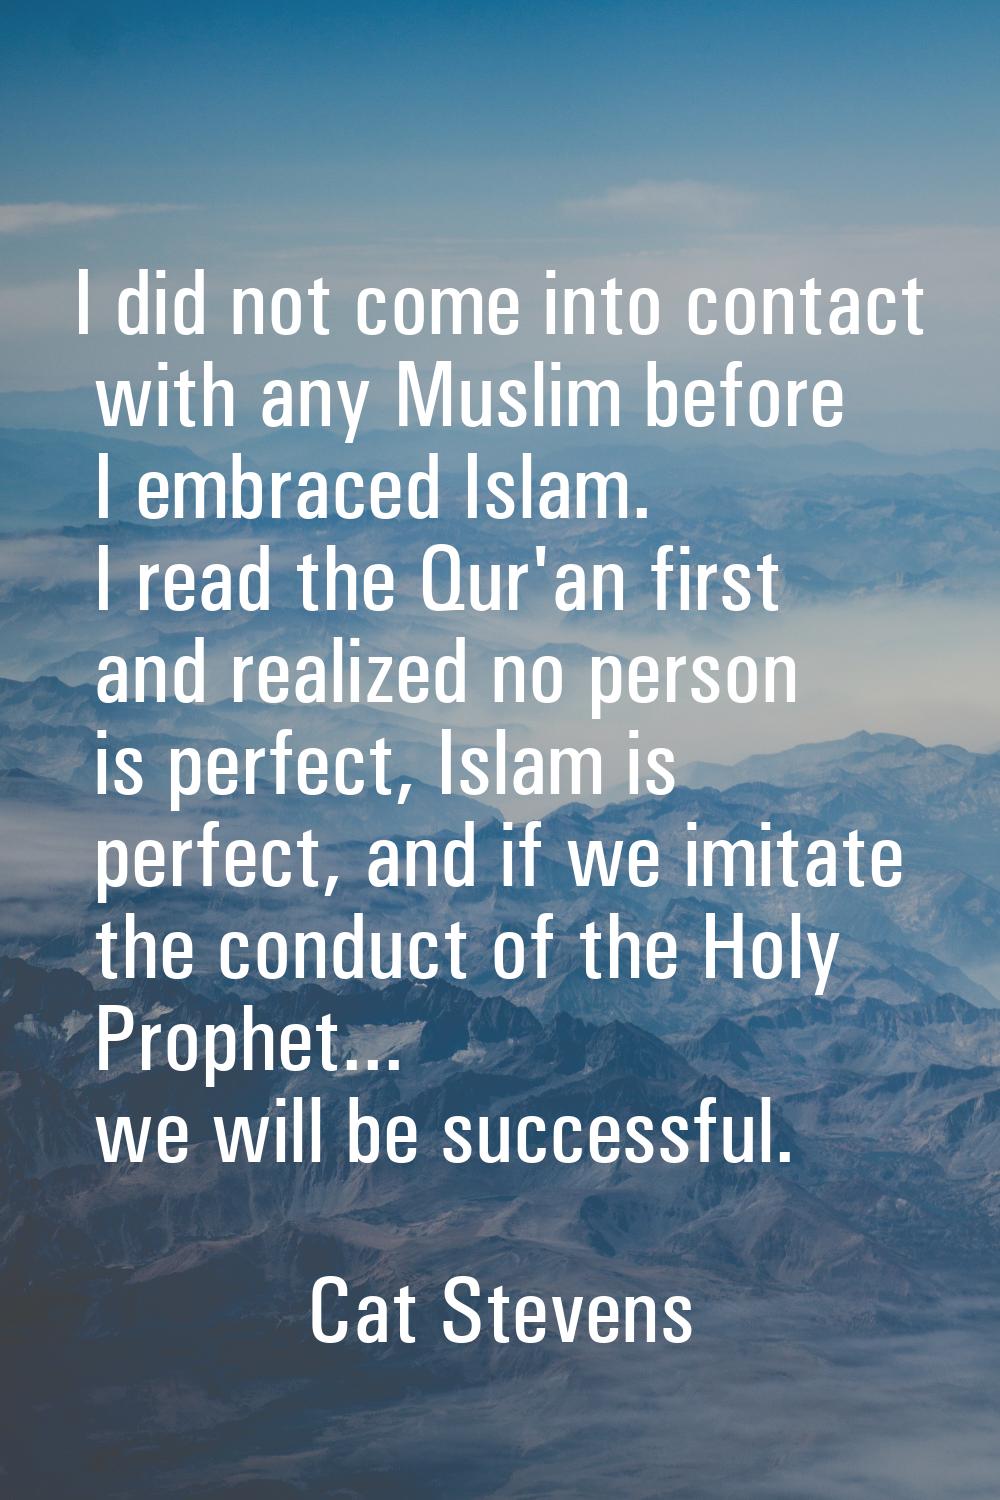 I did not come into contact with any Muslim before I embraced Islam. I read the Qur'an first and re